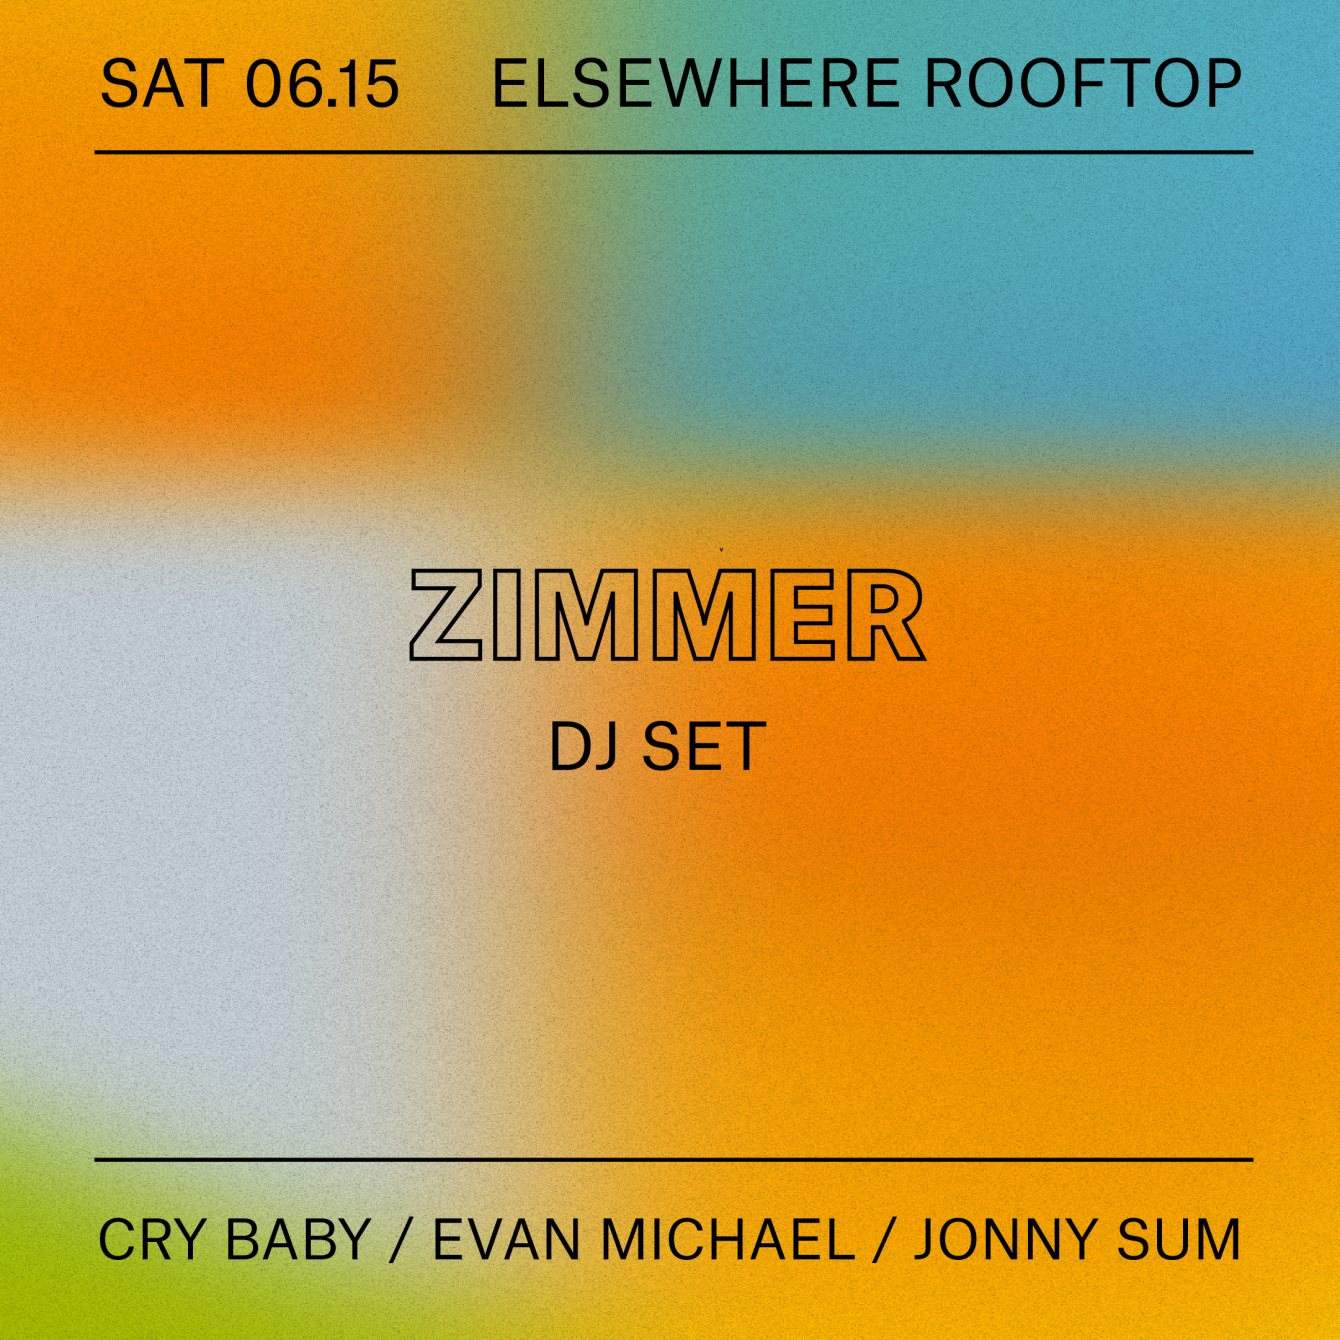 Zimmer (DJ Set at Elsewhere Rooftop), Cry Baby, Evan Michael and Jonny Sum - Página trasera